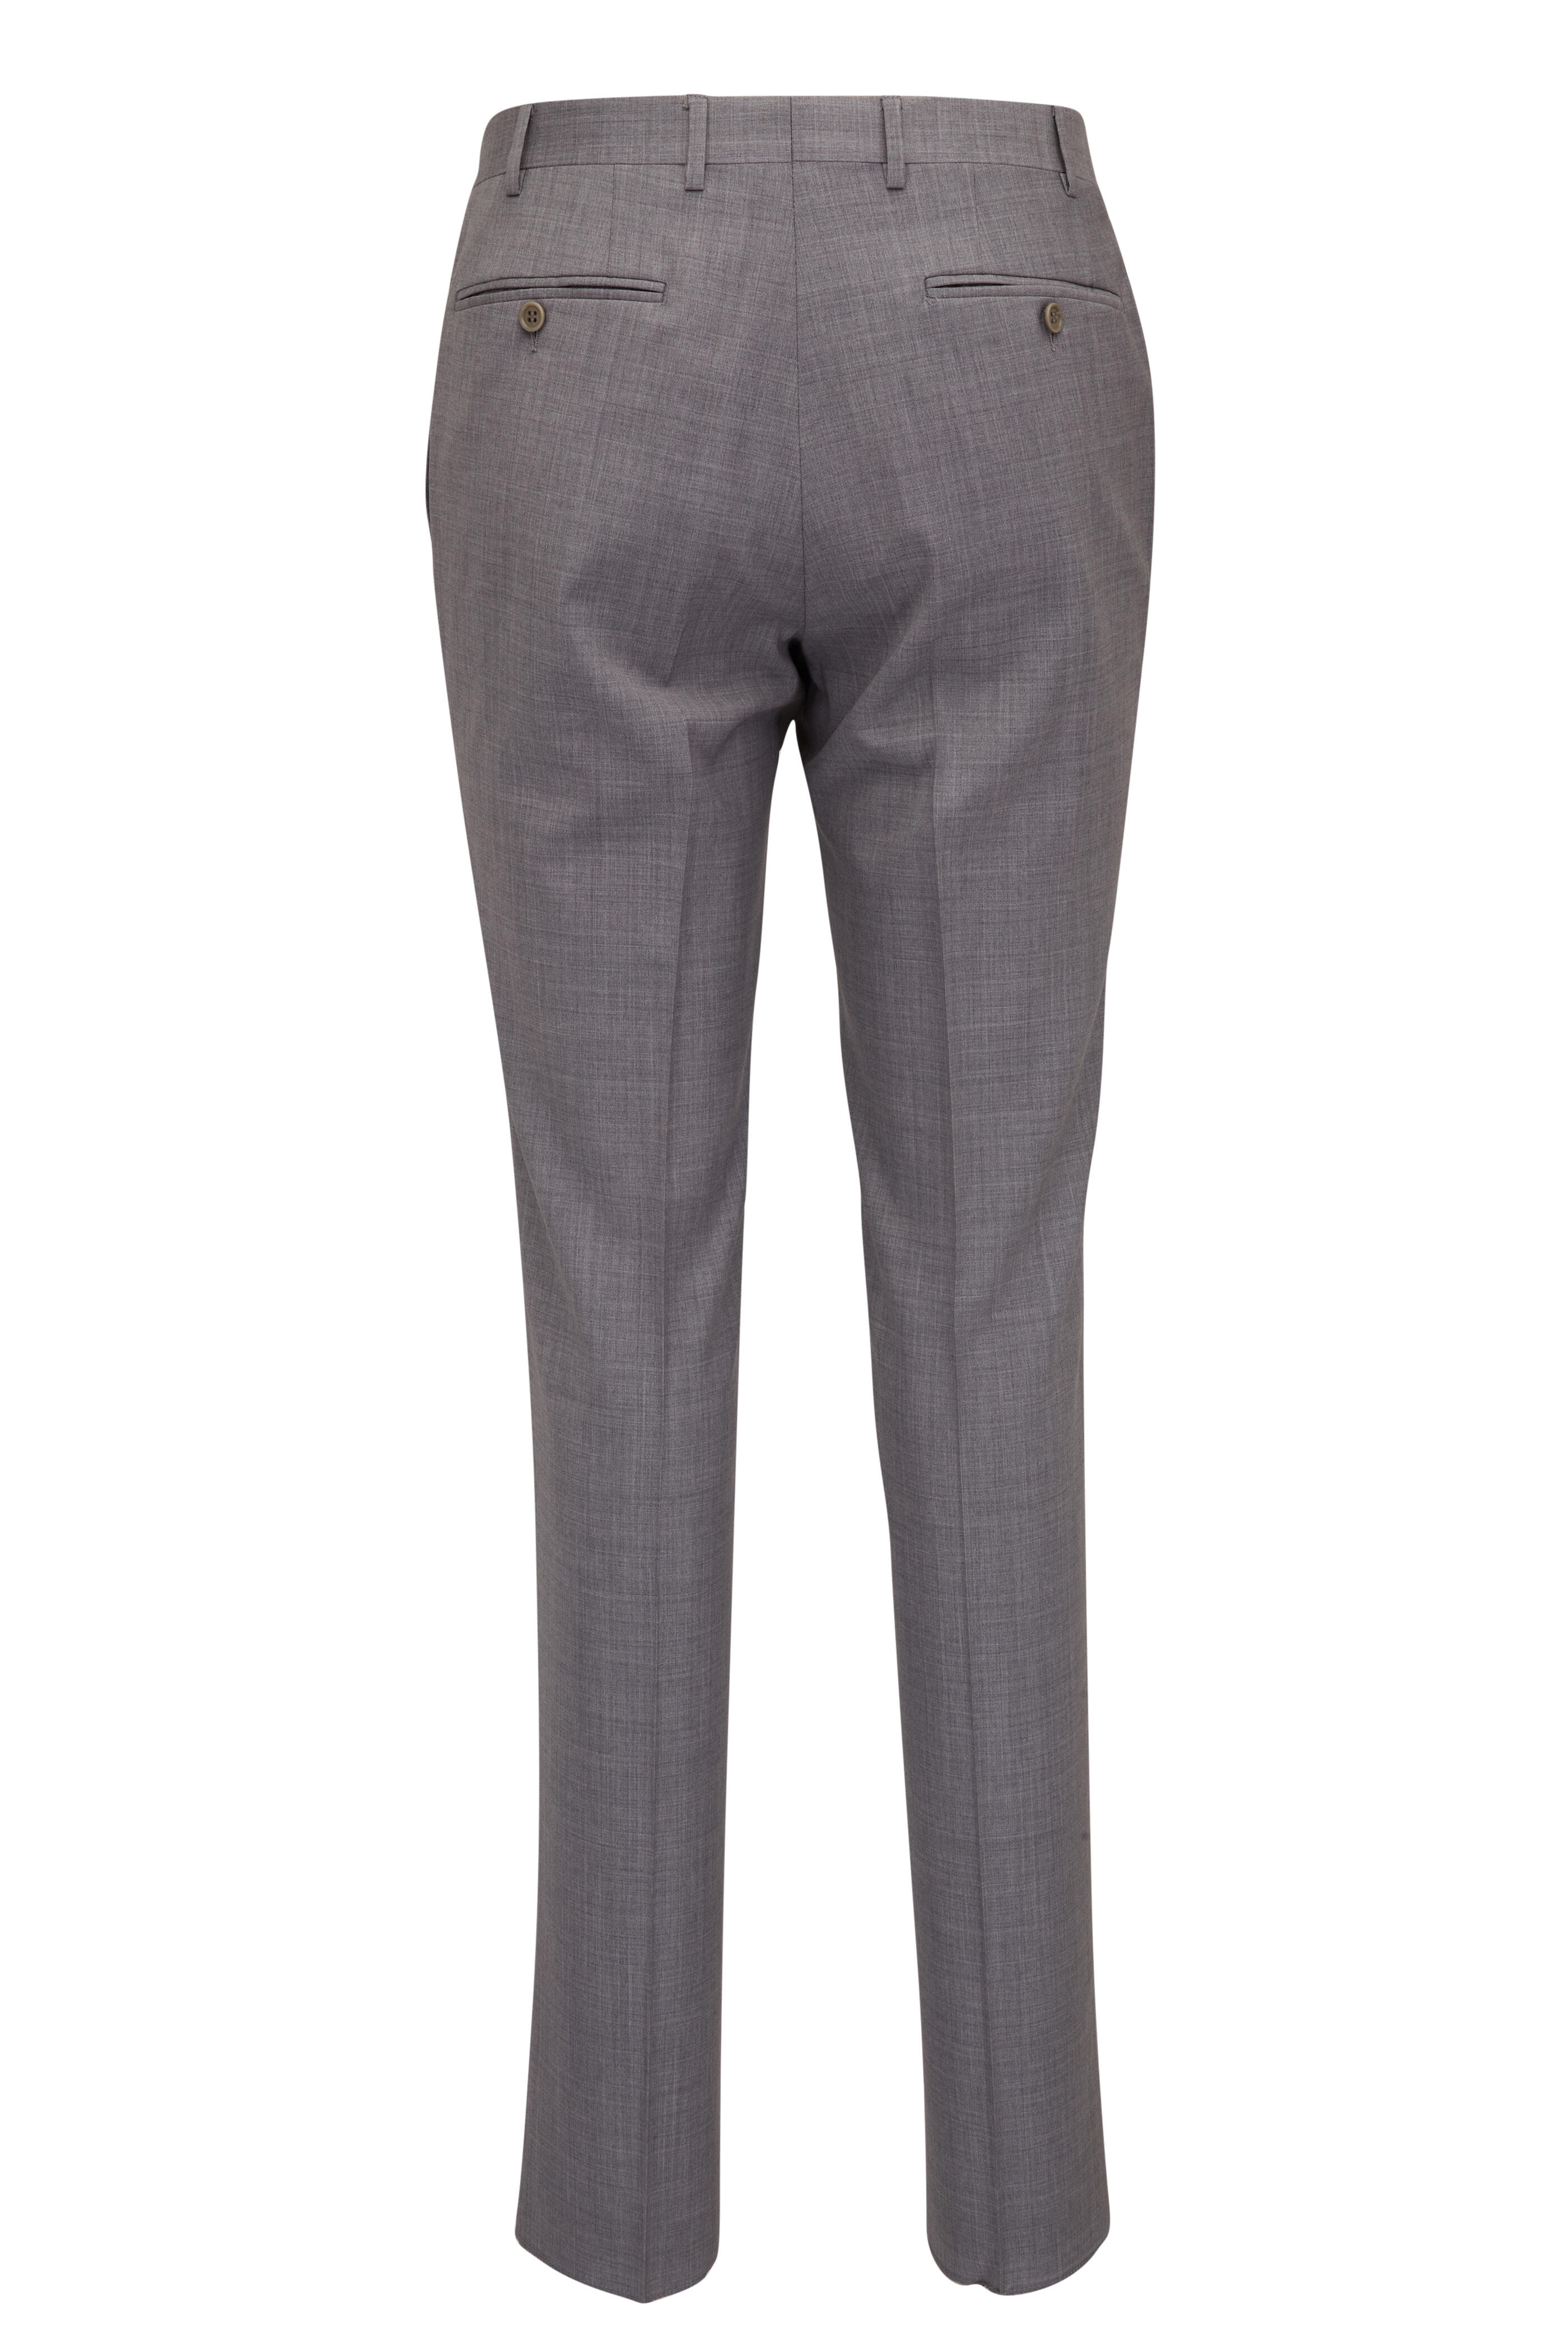 Canali - Pumice Gray Wool Pant | Mitchell Stores